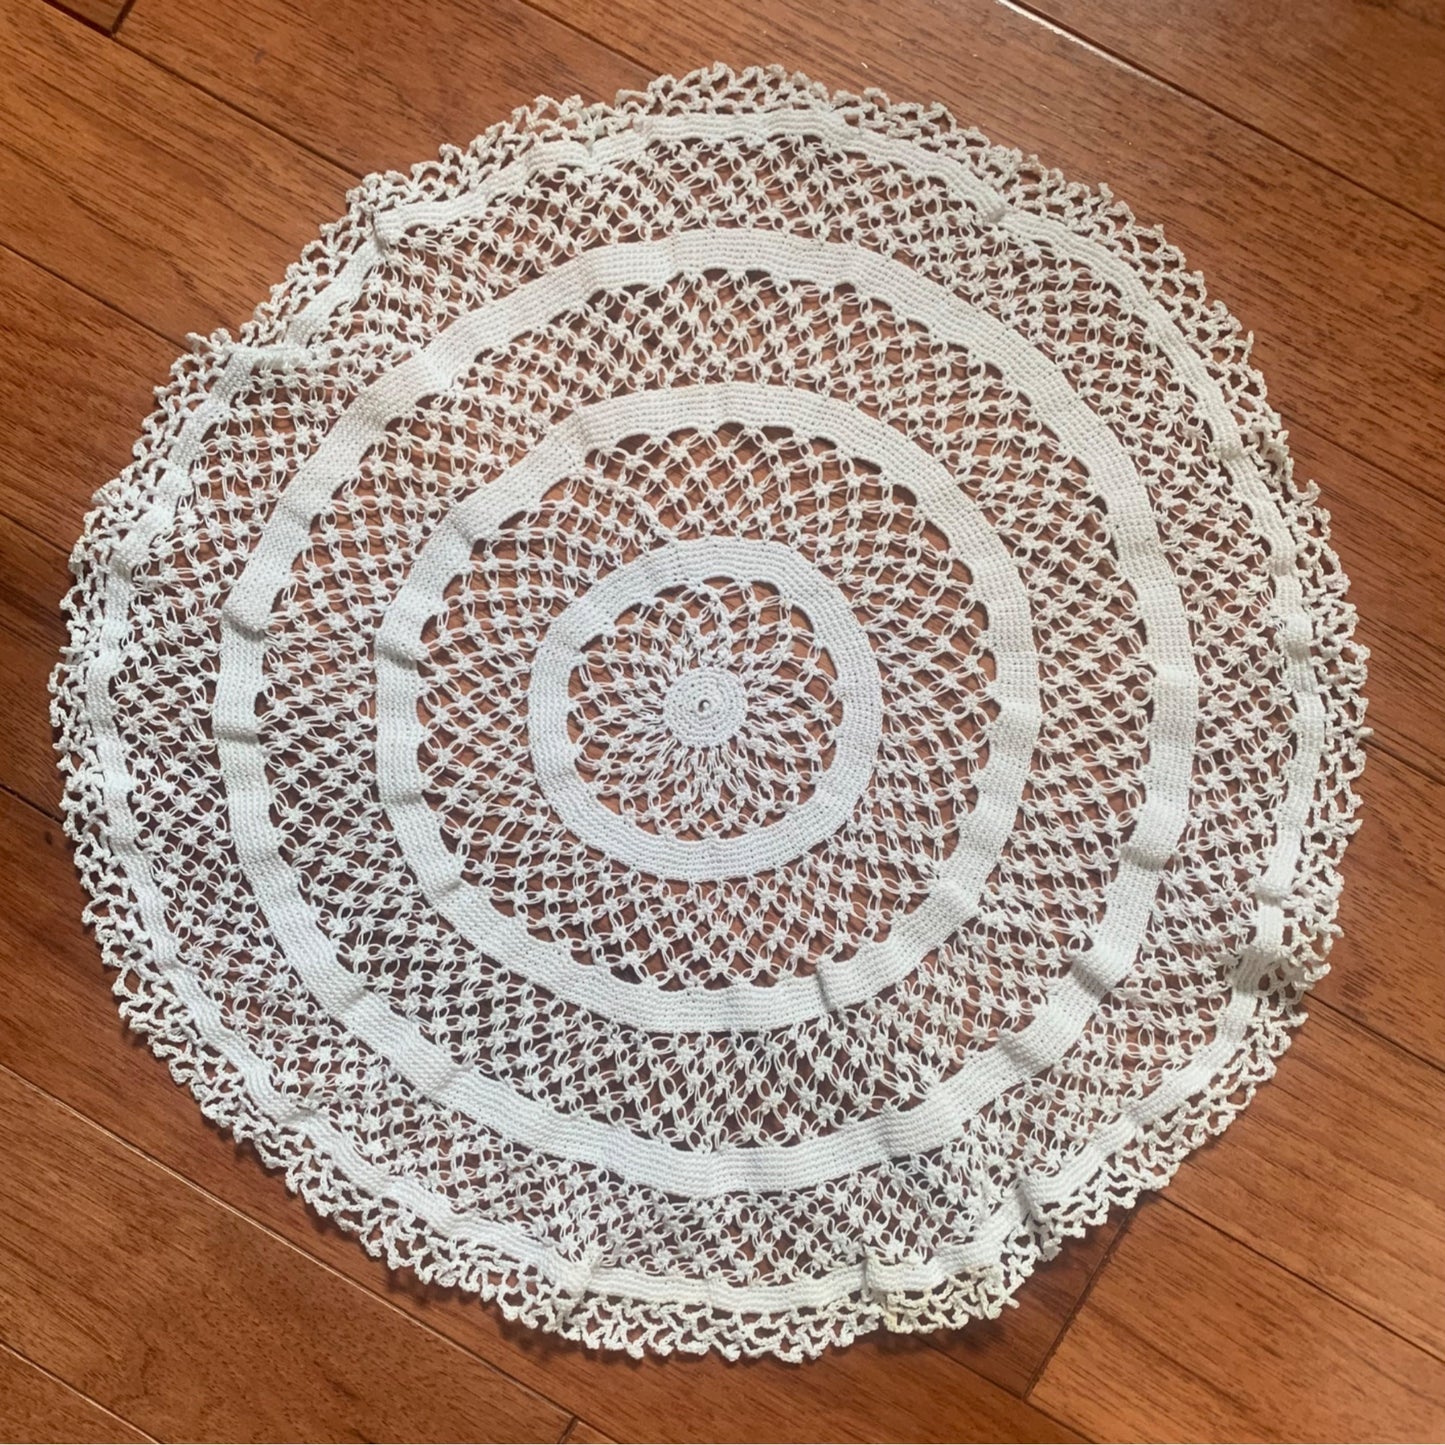 Vintage hand crocheted round doily 12 inches